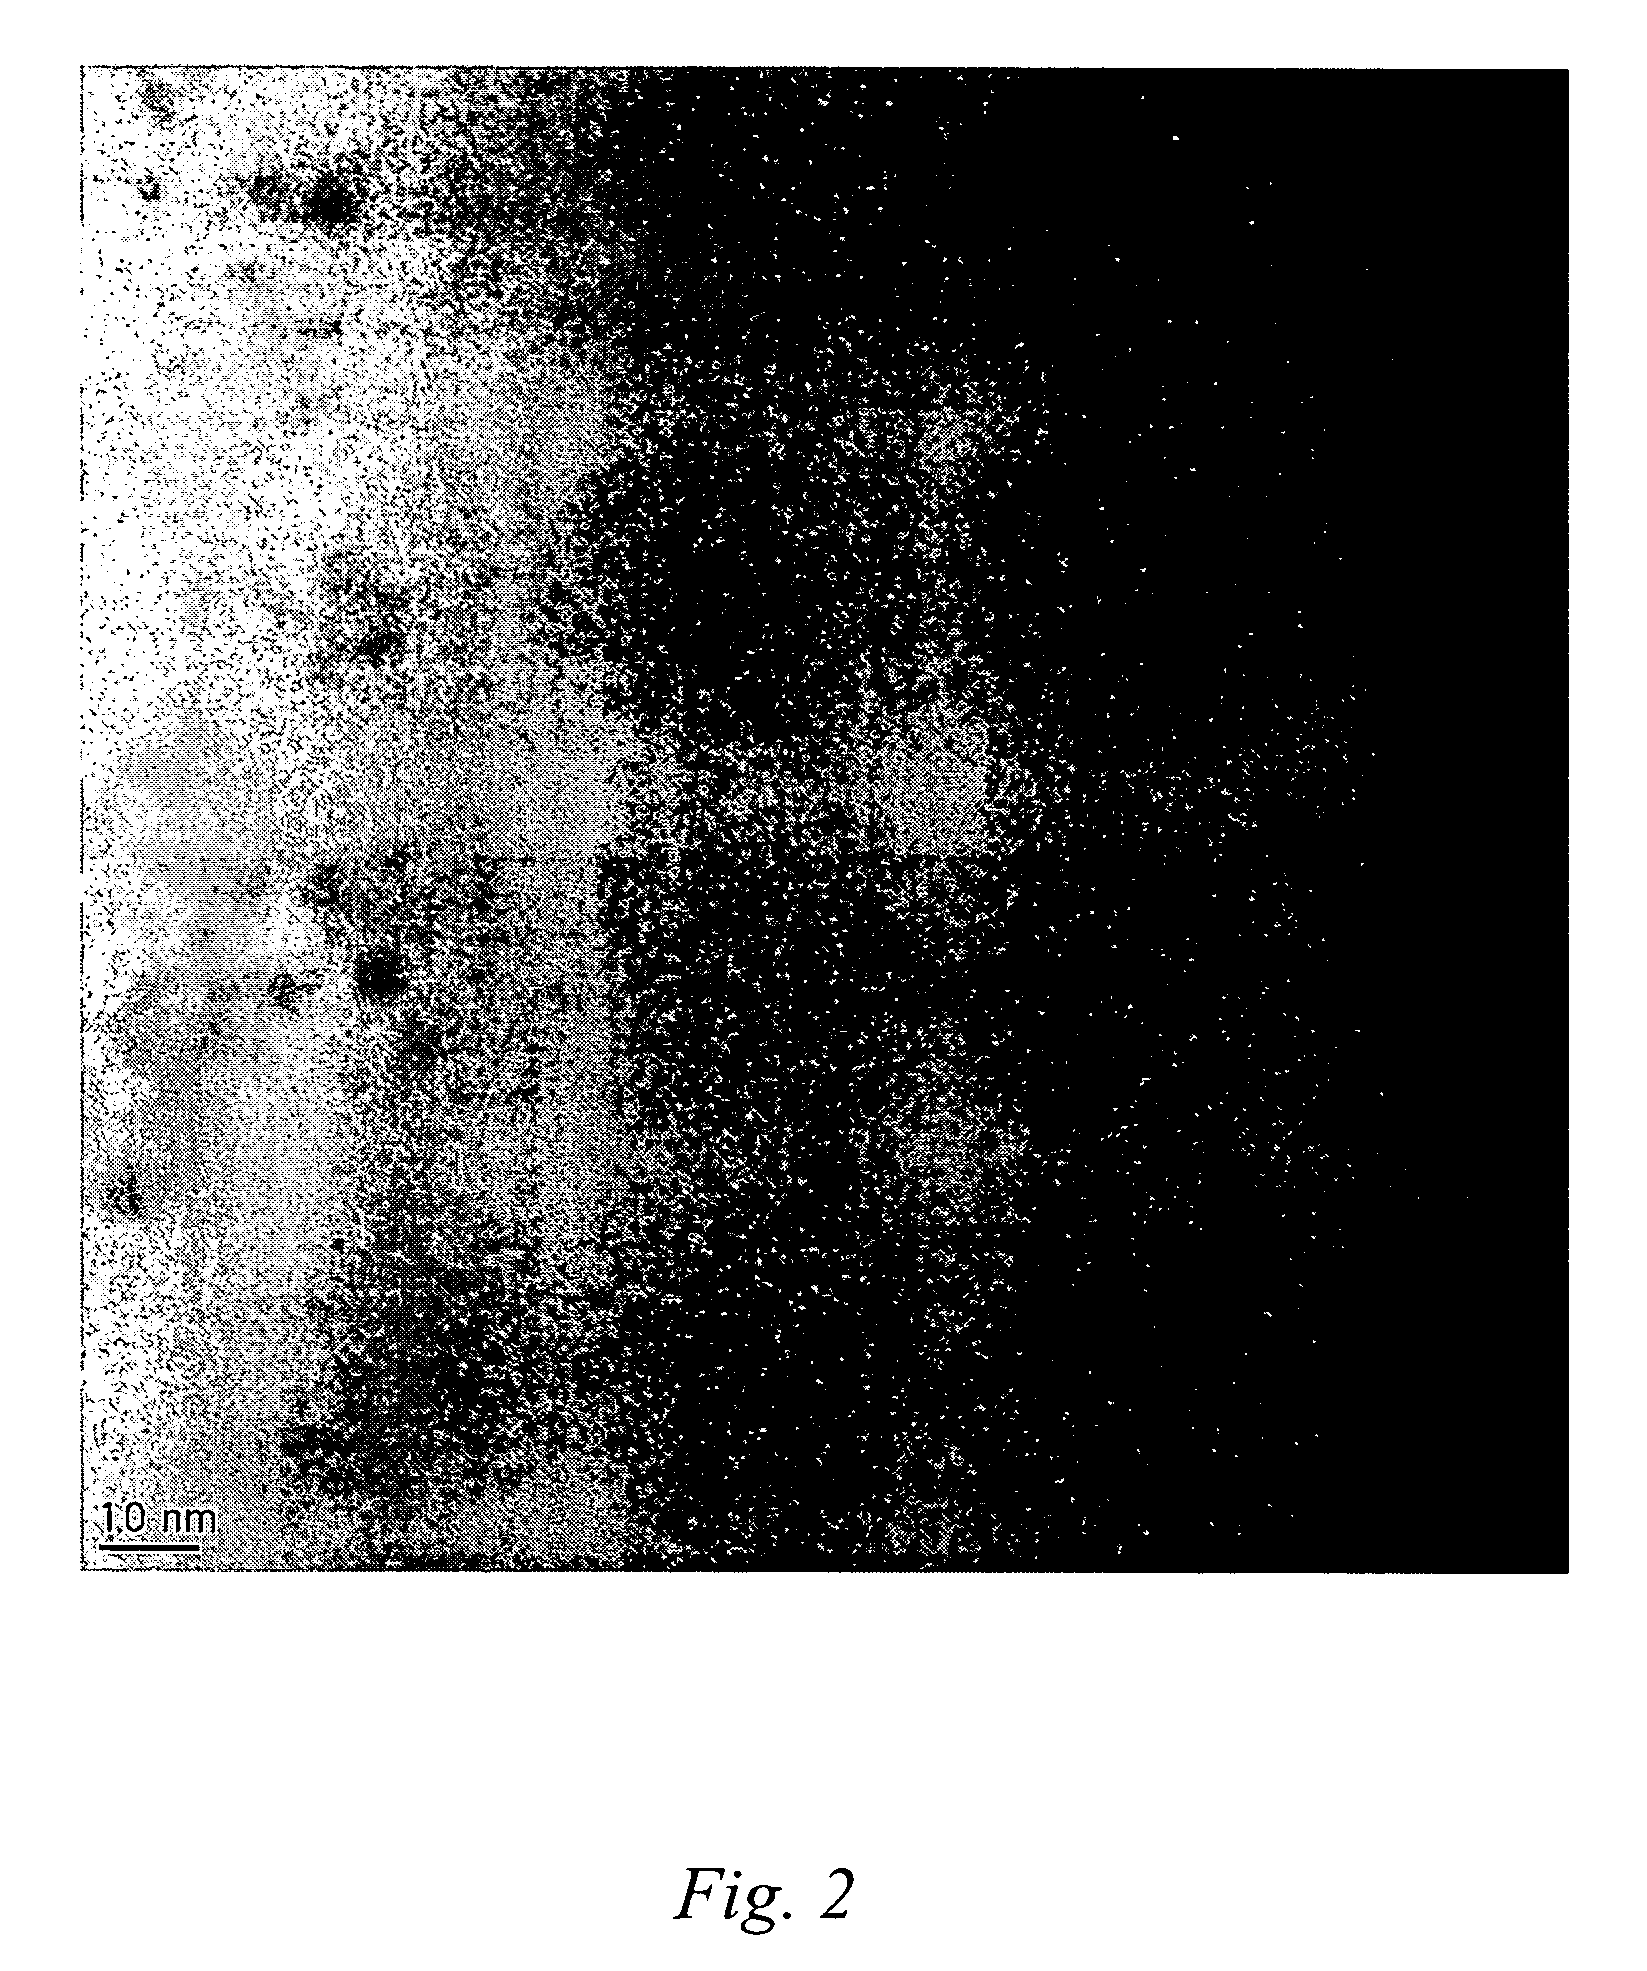 Process for preparing nano-sized metal oxide particles